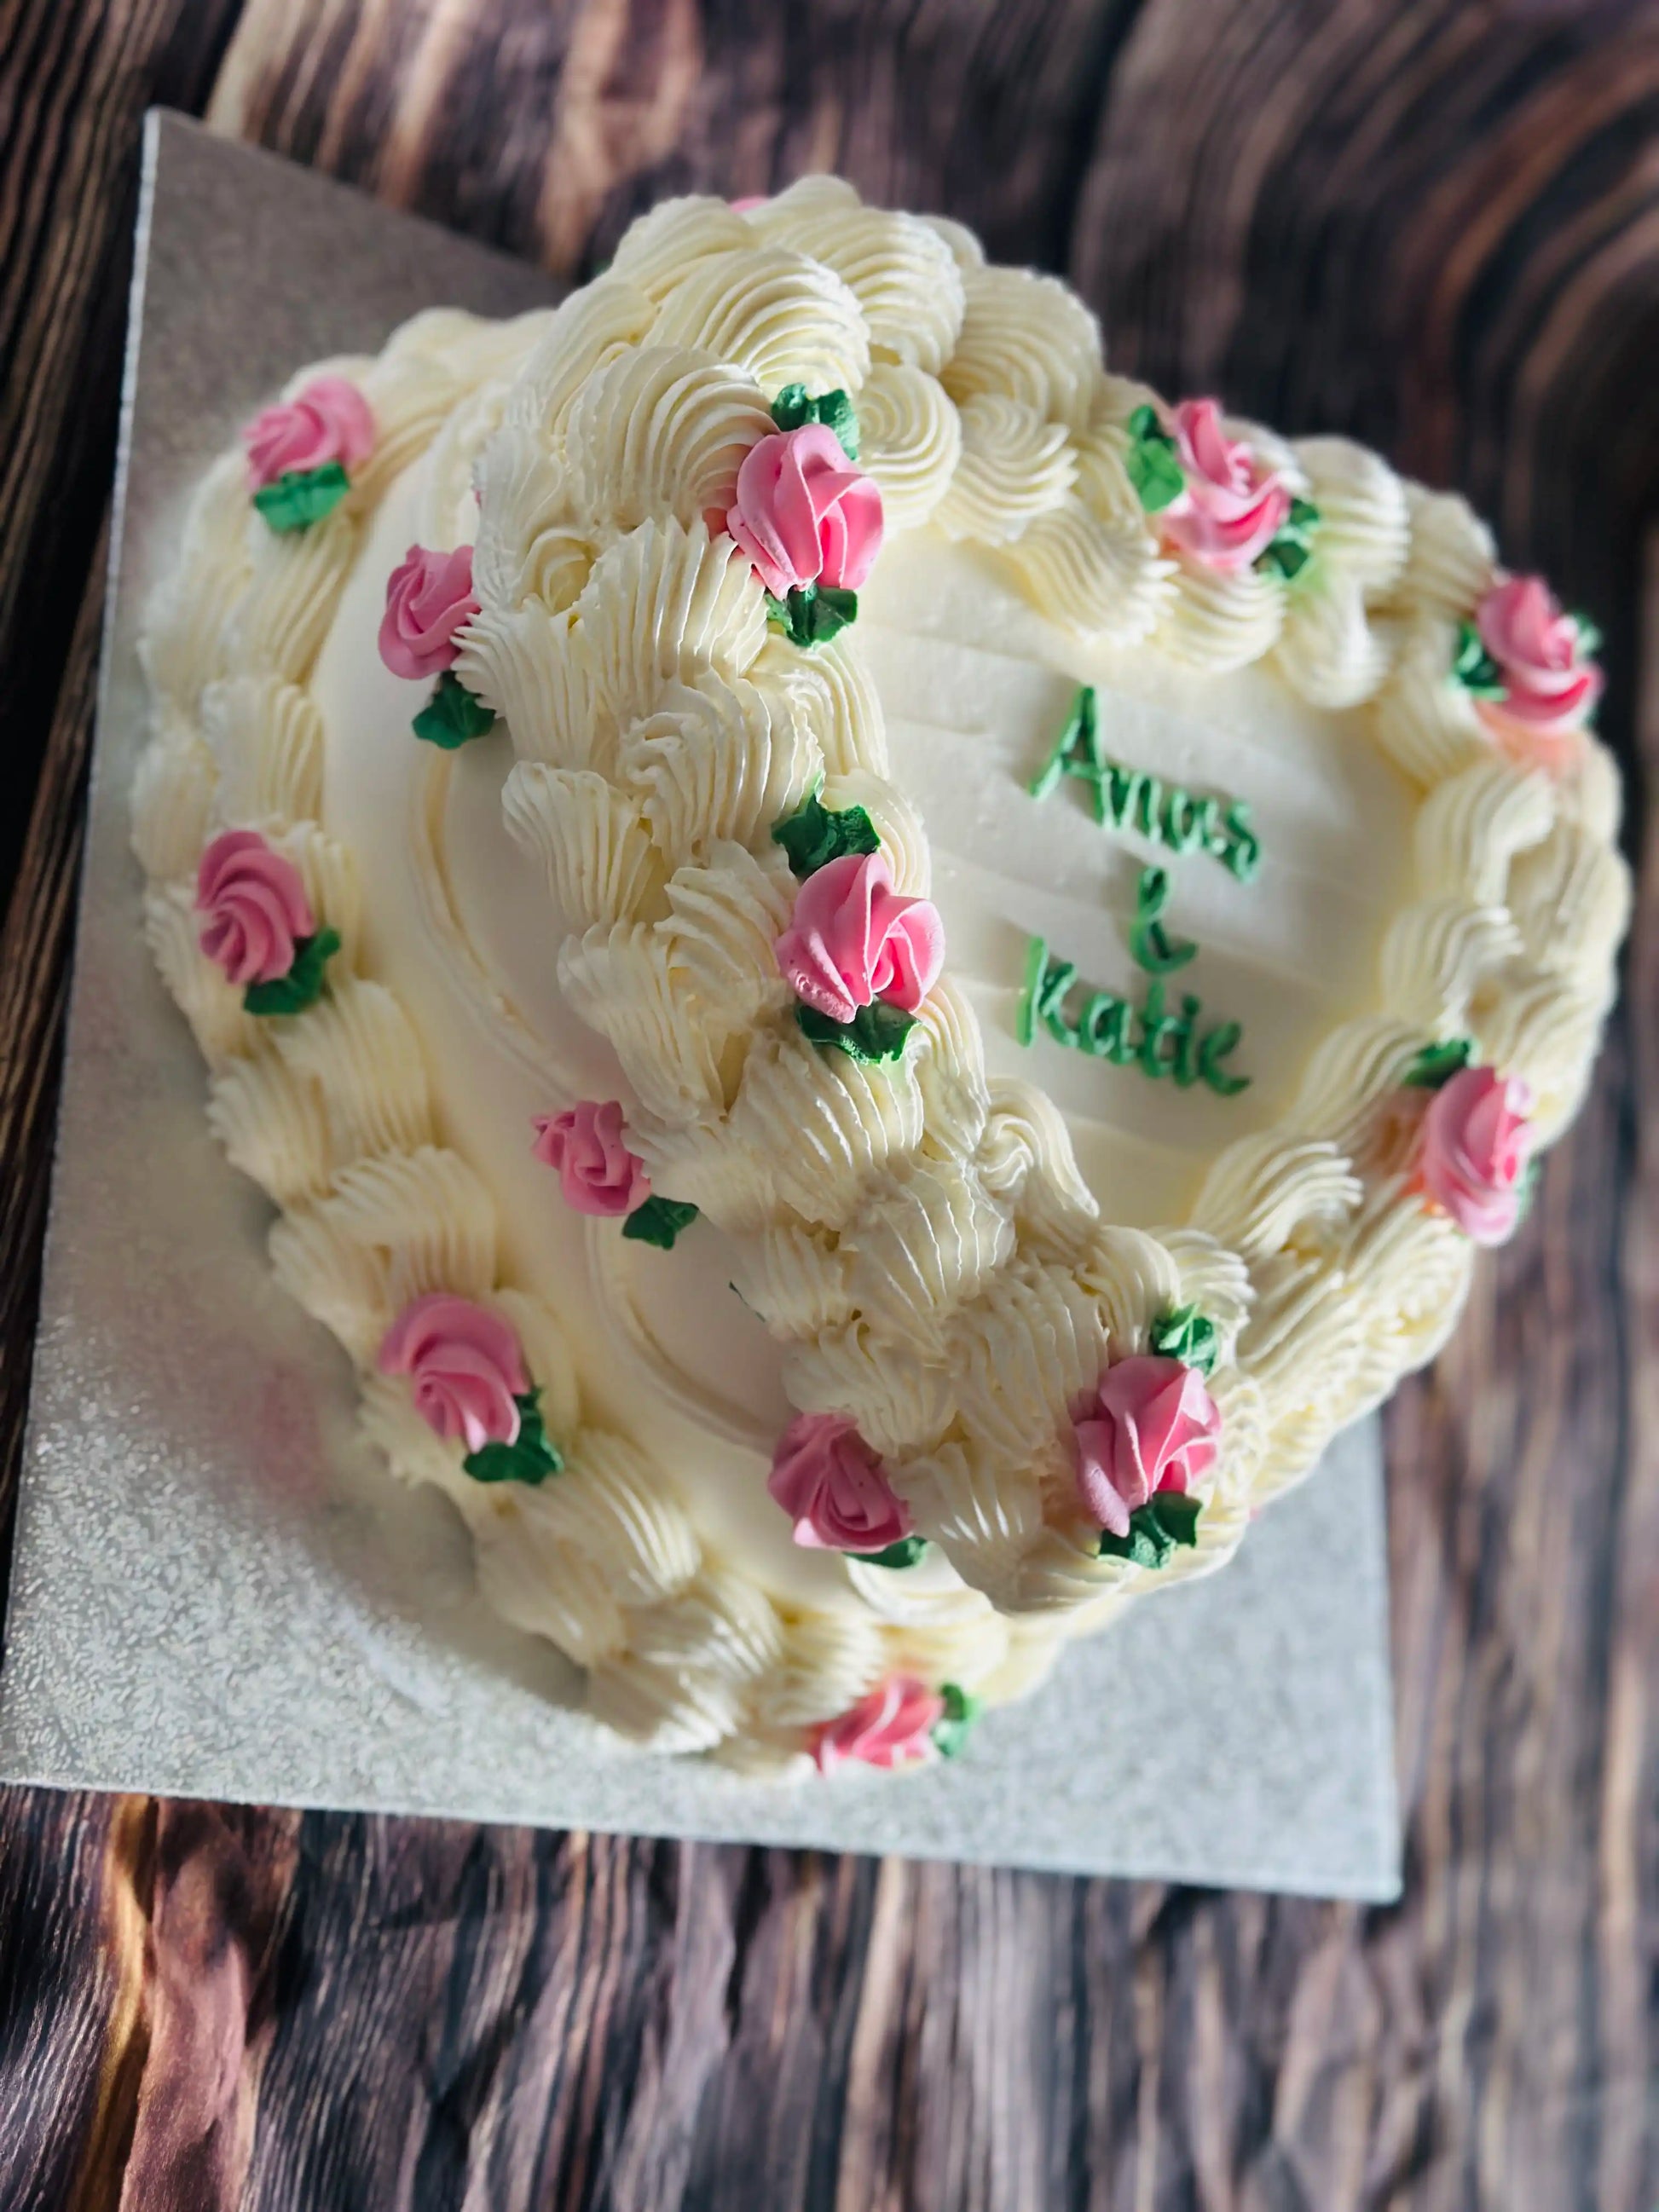 Timeless vintage heart cake adorned with hand-piped flowers, available in Walthamstow through CakeTrays.co.uk.